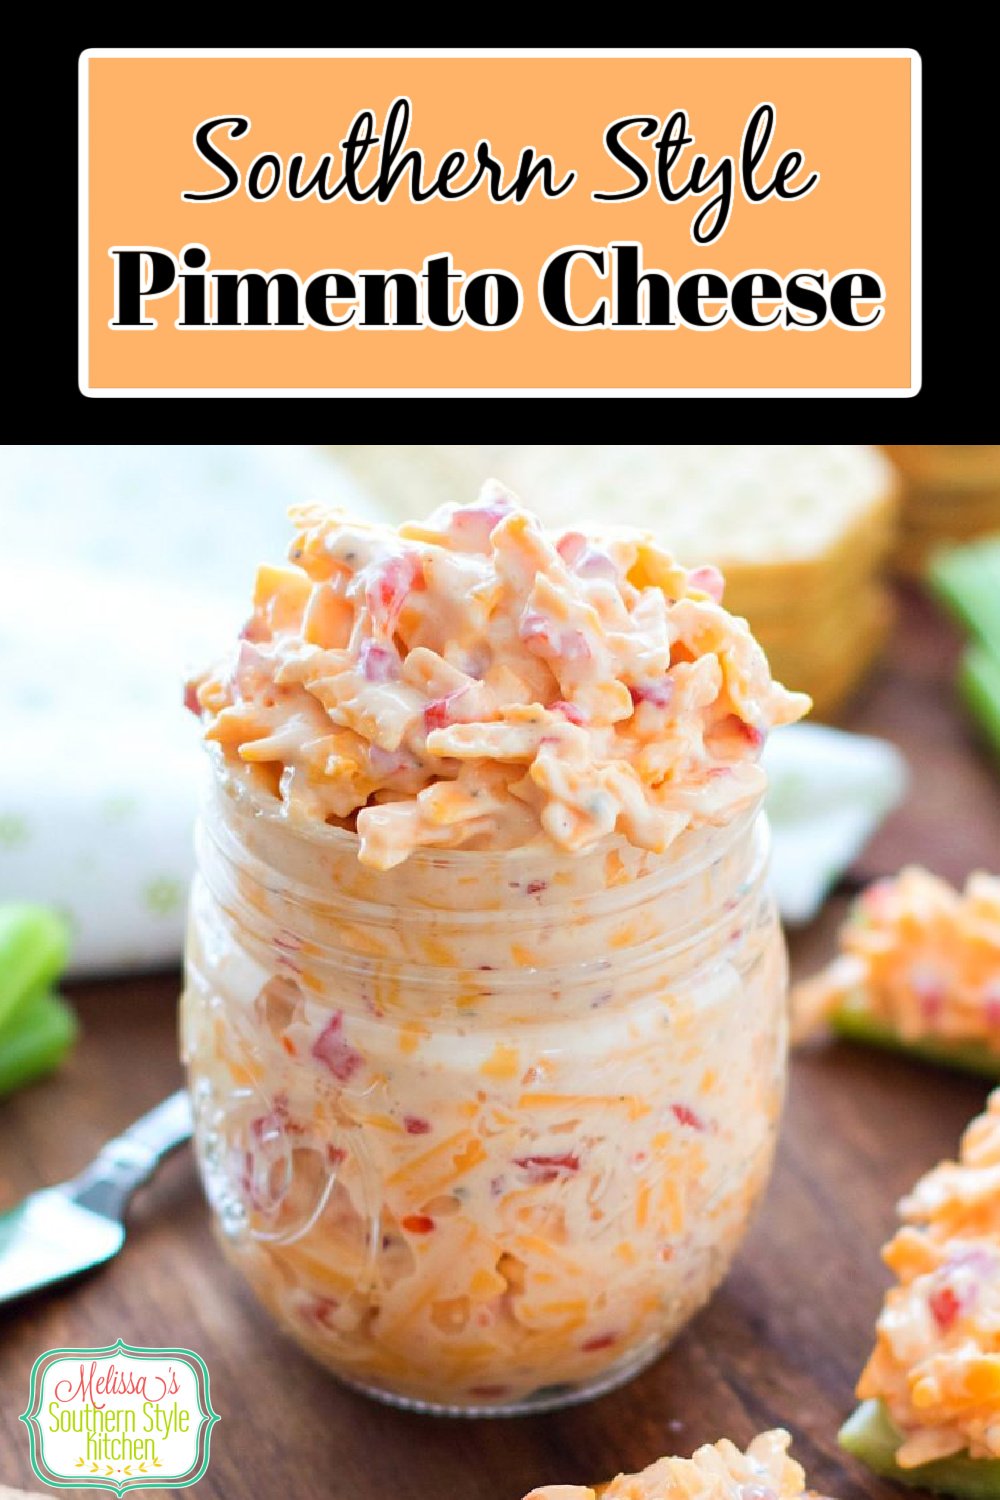 Whip-up a batch of Southern Pimento Cheese for light meals and snacking #pimentocheese #cheese #pimentos #cheesy #appetizer #snacks #pimientocheese #southernpimentocheese #southernfood #southernrecipes #cheese #cheddarcheese #vegetarian